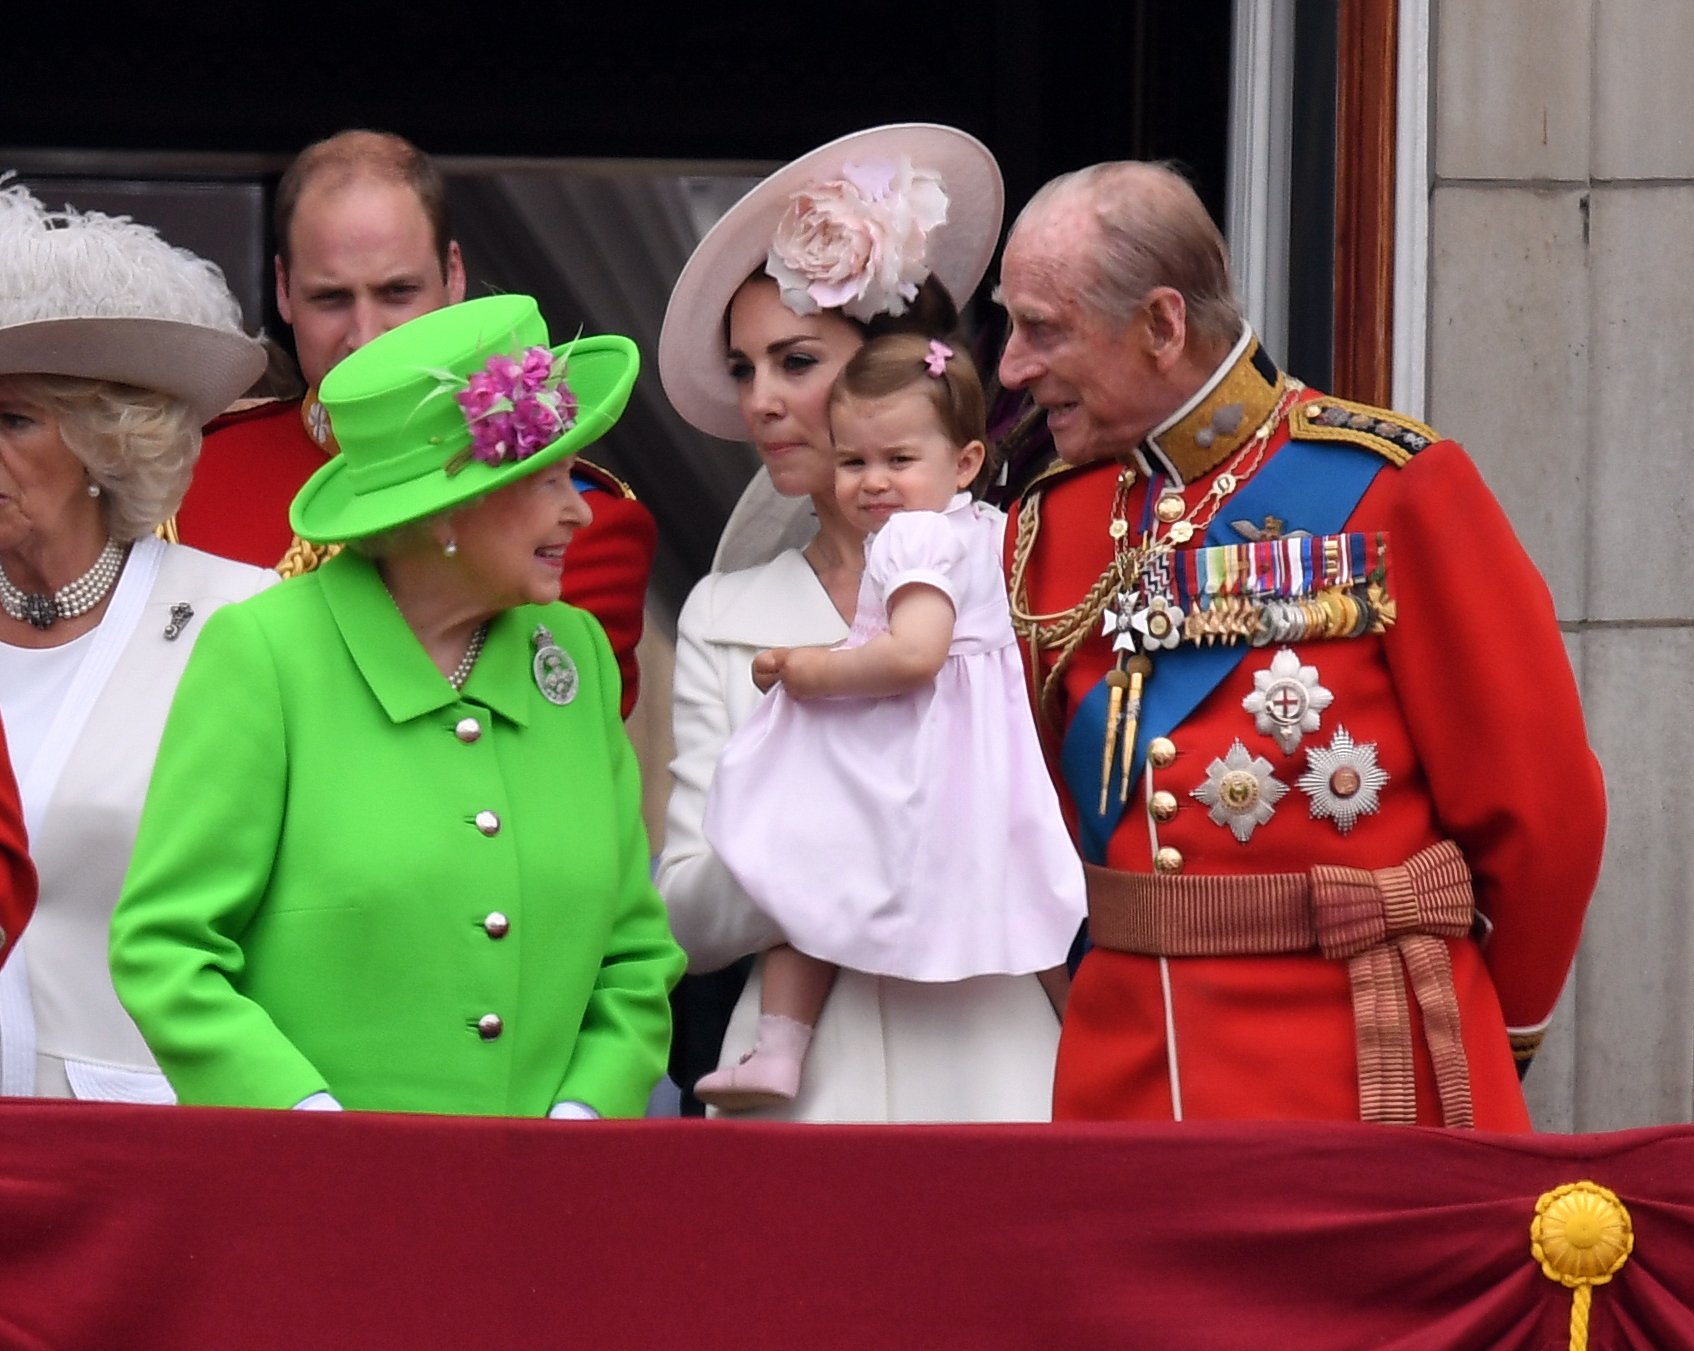 Duchess Kate, Princess Charlotte, Queen Elizabeth ll, and Prince Philip on the balcony of Buckingham Palace after the Trooping the Colour ceremony on June 11, 2016, in London, England. | Source: Getty Images